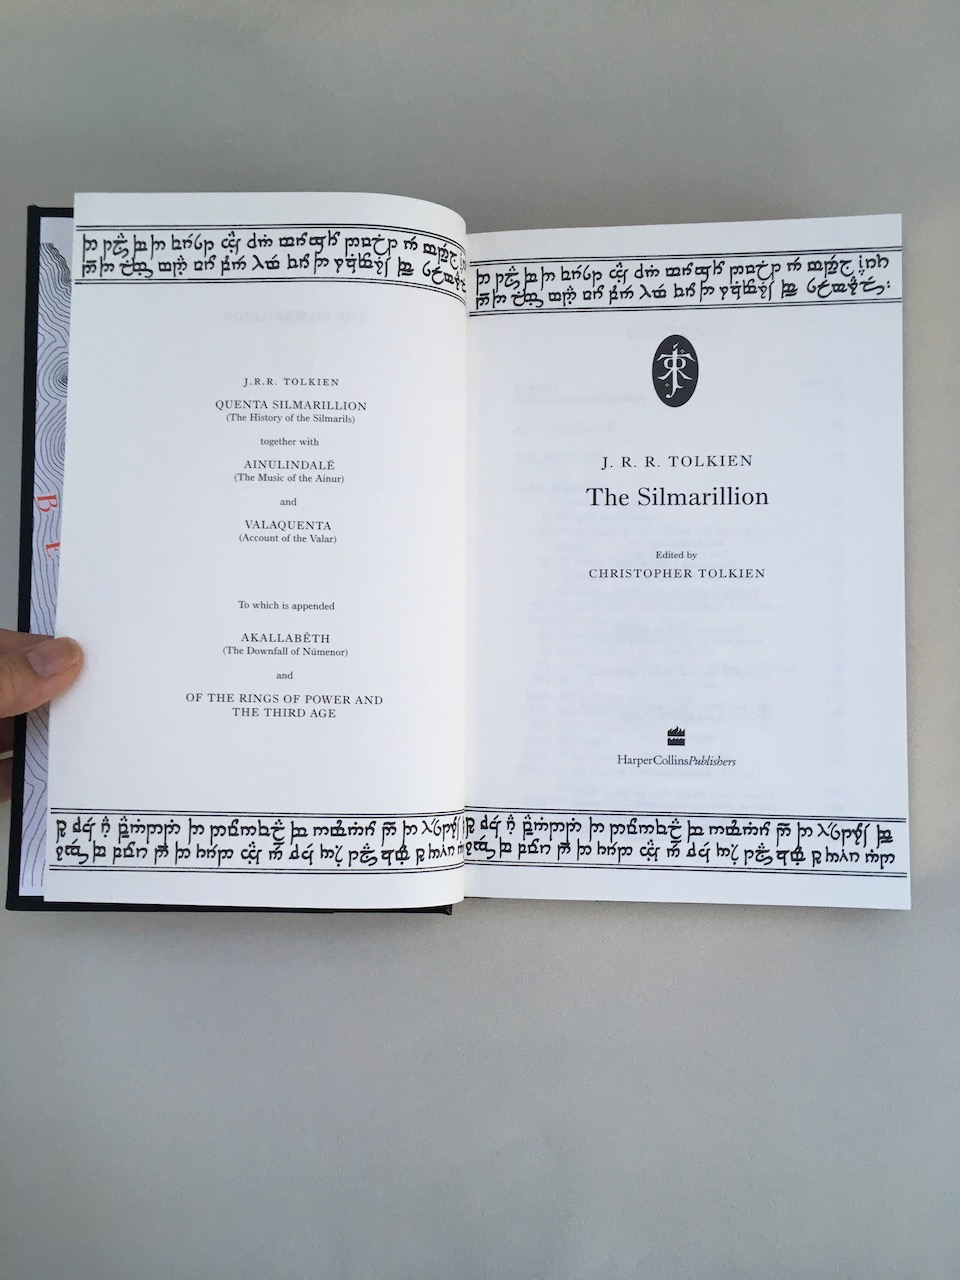 Black Limited De Luxe edition of the Silmarillion 2002 18